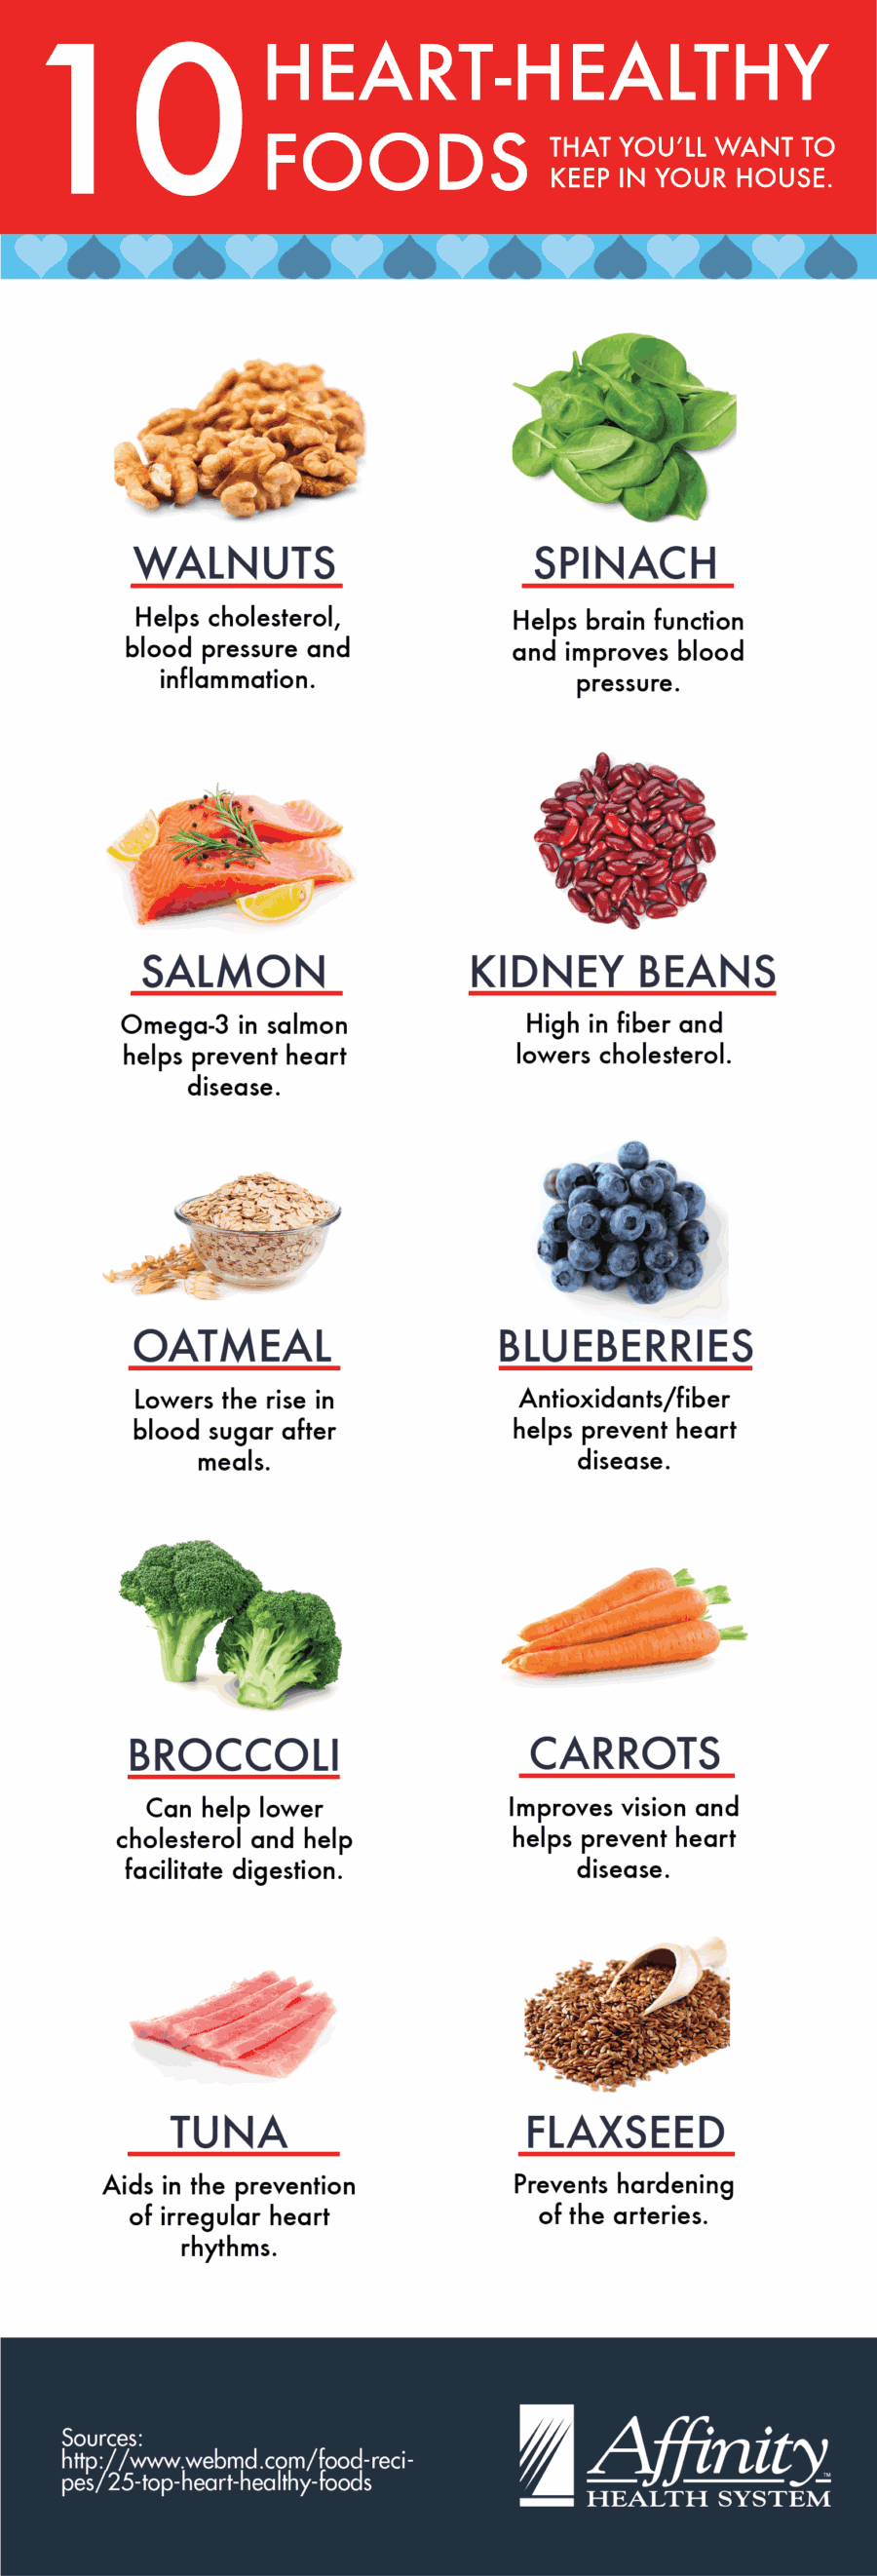 Heart Healthy Foods Infographic